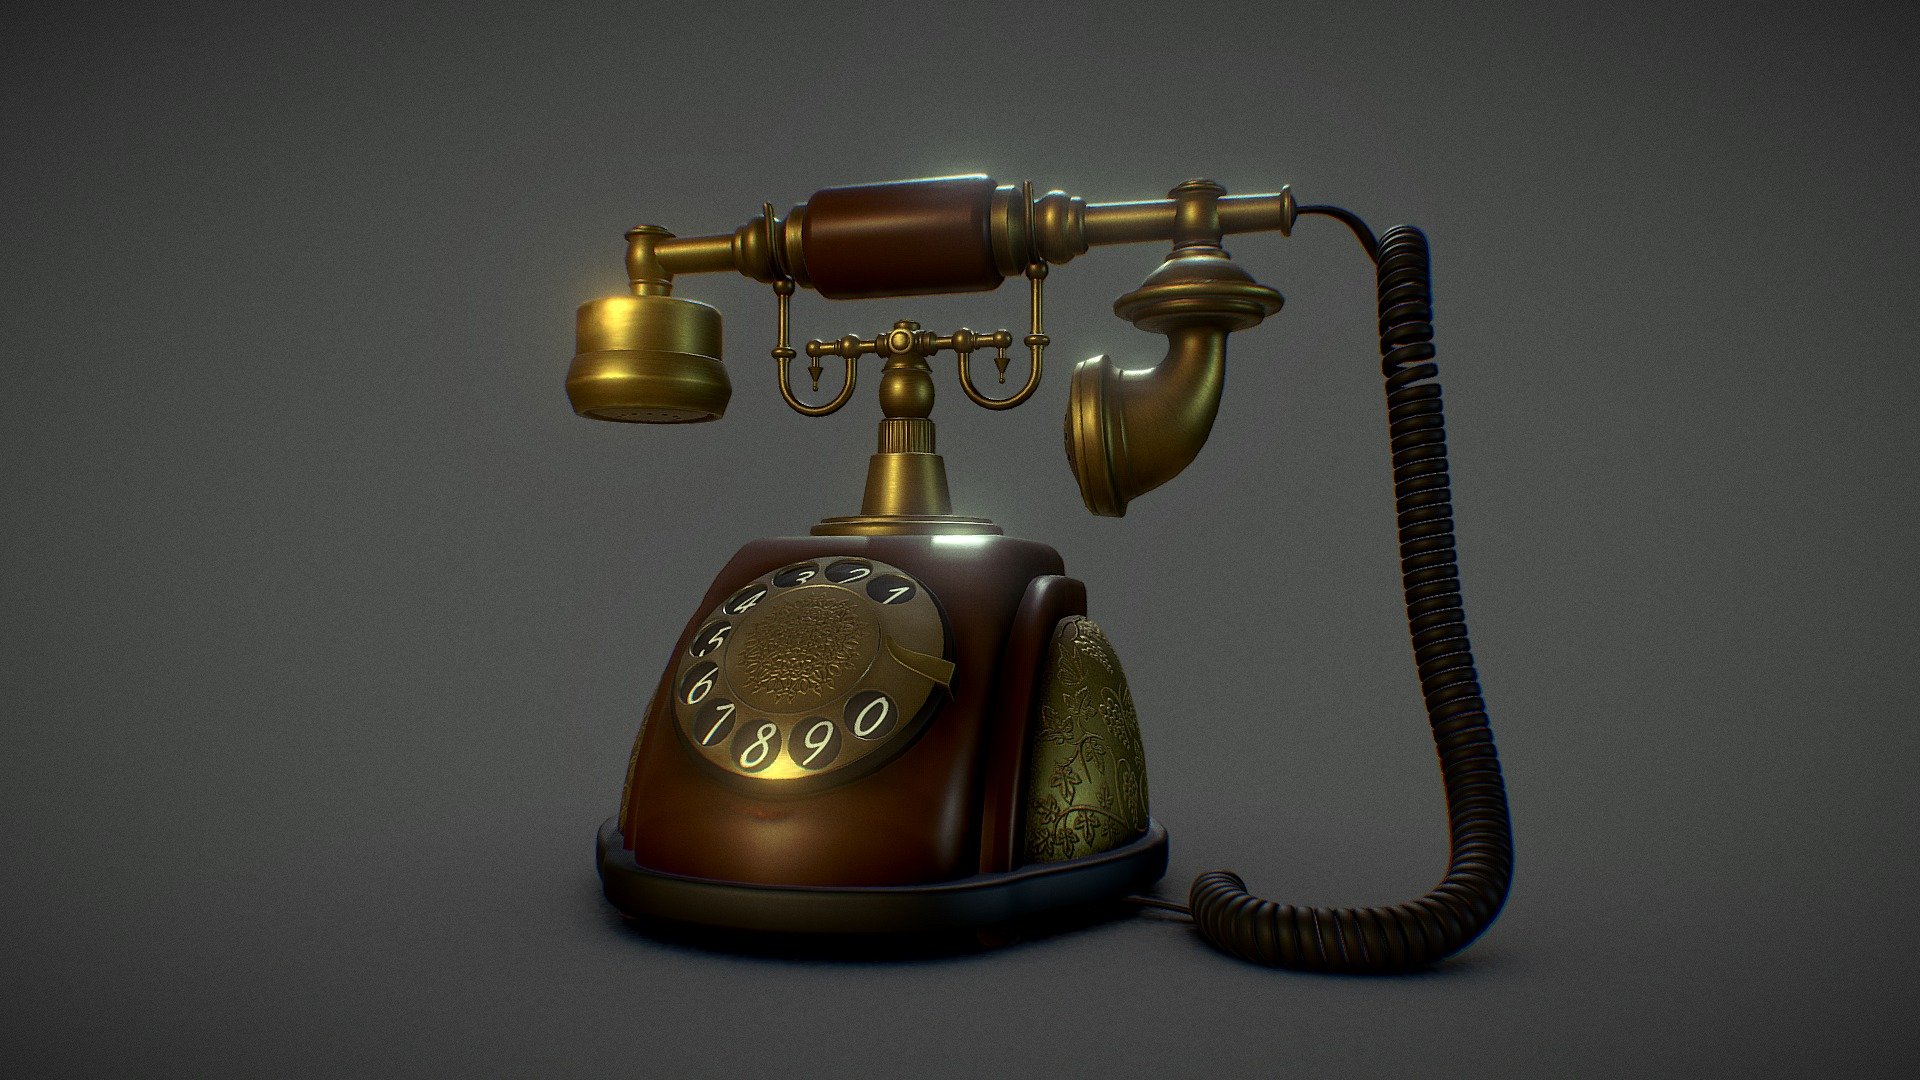 An antique telephone that I had seen somewhere. I liked it and I decided to make one.

The copper/bronze finish on polished wood has always caught my attention and this little piece of furniture has it all.

Thanks to Sketchfab for implementing the material and scene setting presets. That has made it very easy to swithch between materials and shaders since Mudbox does not have a PBR plugin for me to work with 3d model